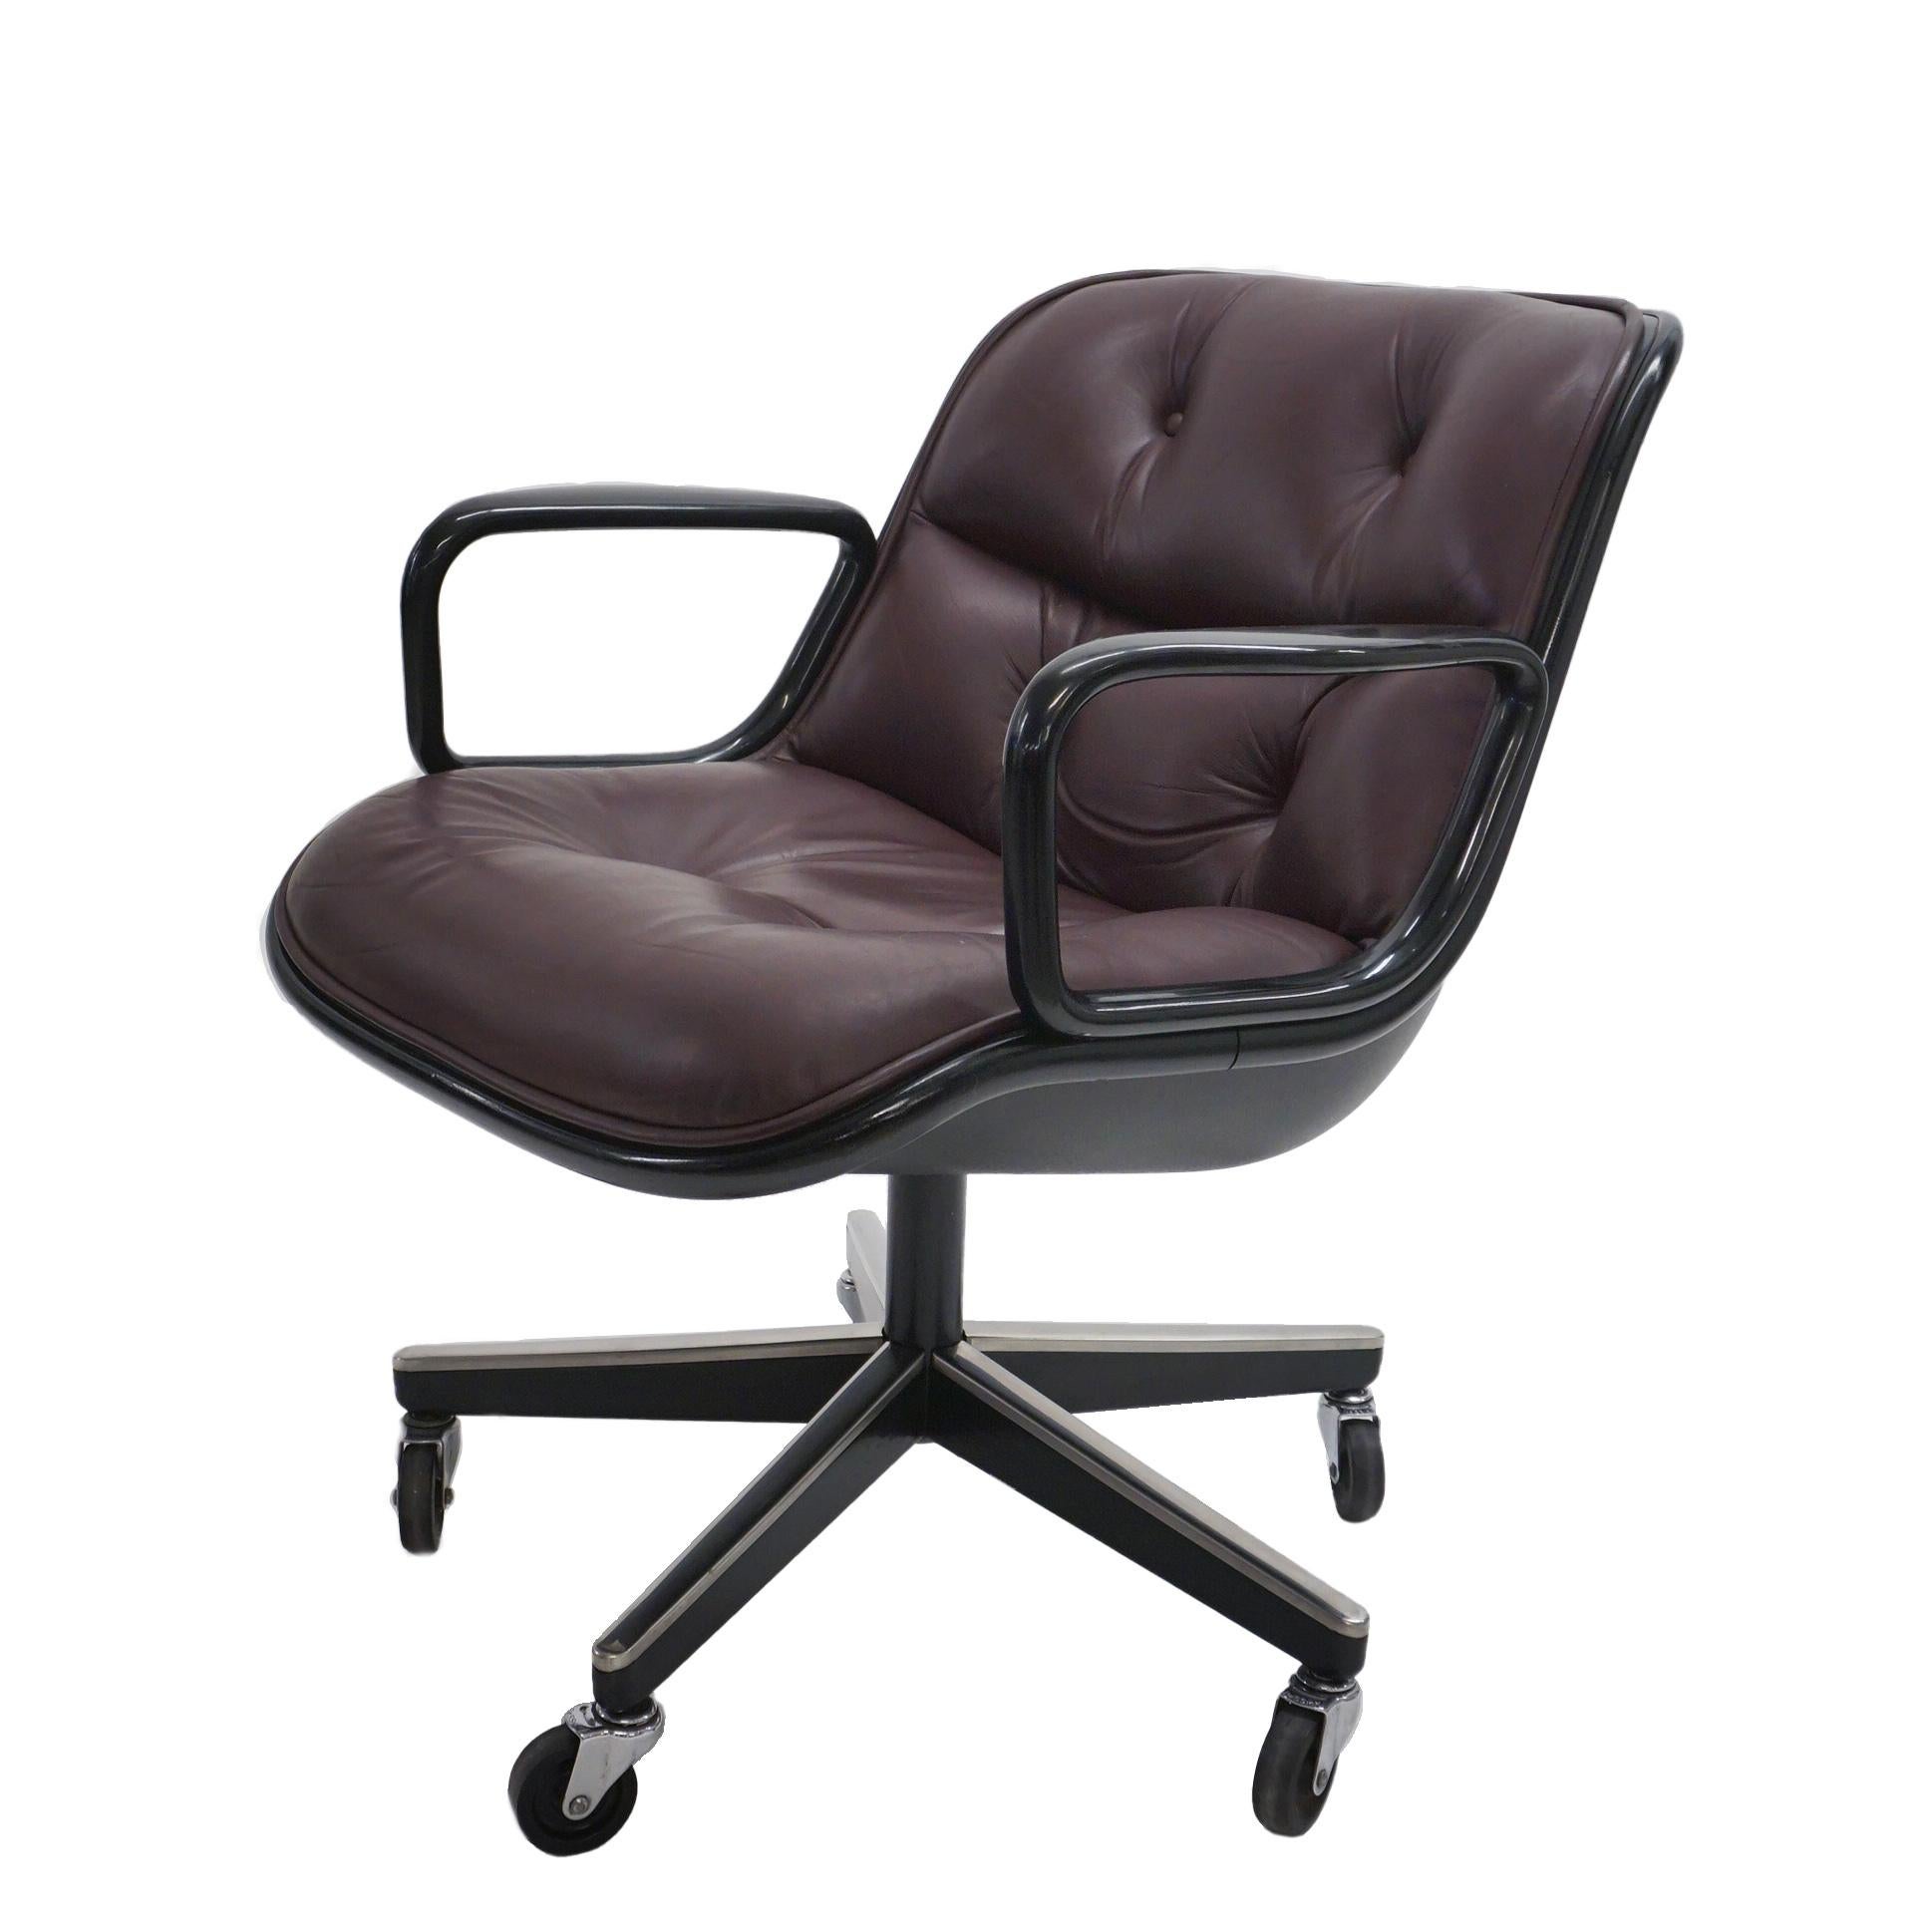 Offering the classic Pollock Executive Chair in this beautiful aubergine leather, black steel frame, in good condition. The leather upholstery has been recently redone and in excellent condition.

Charles Pollock was a master of design who's work